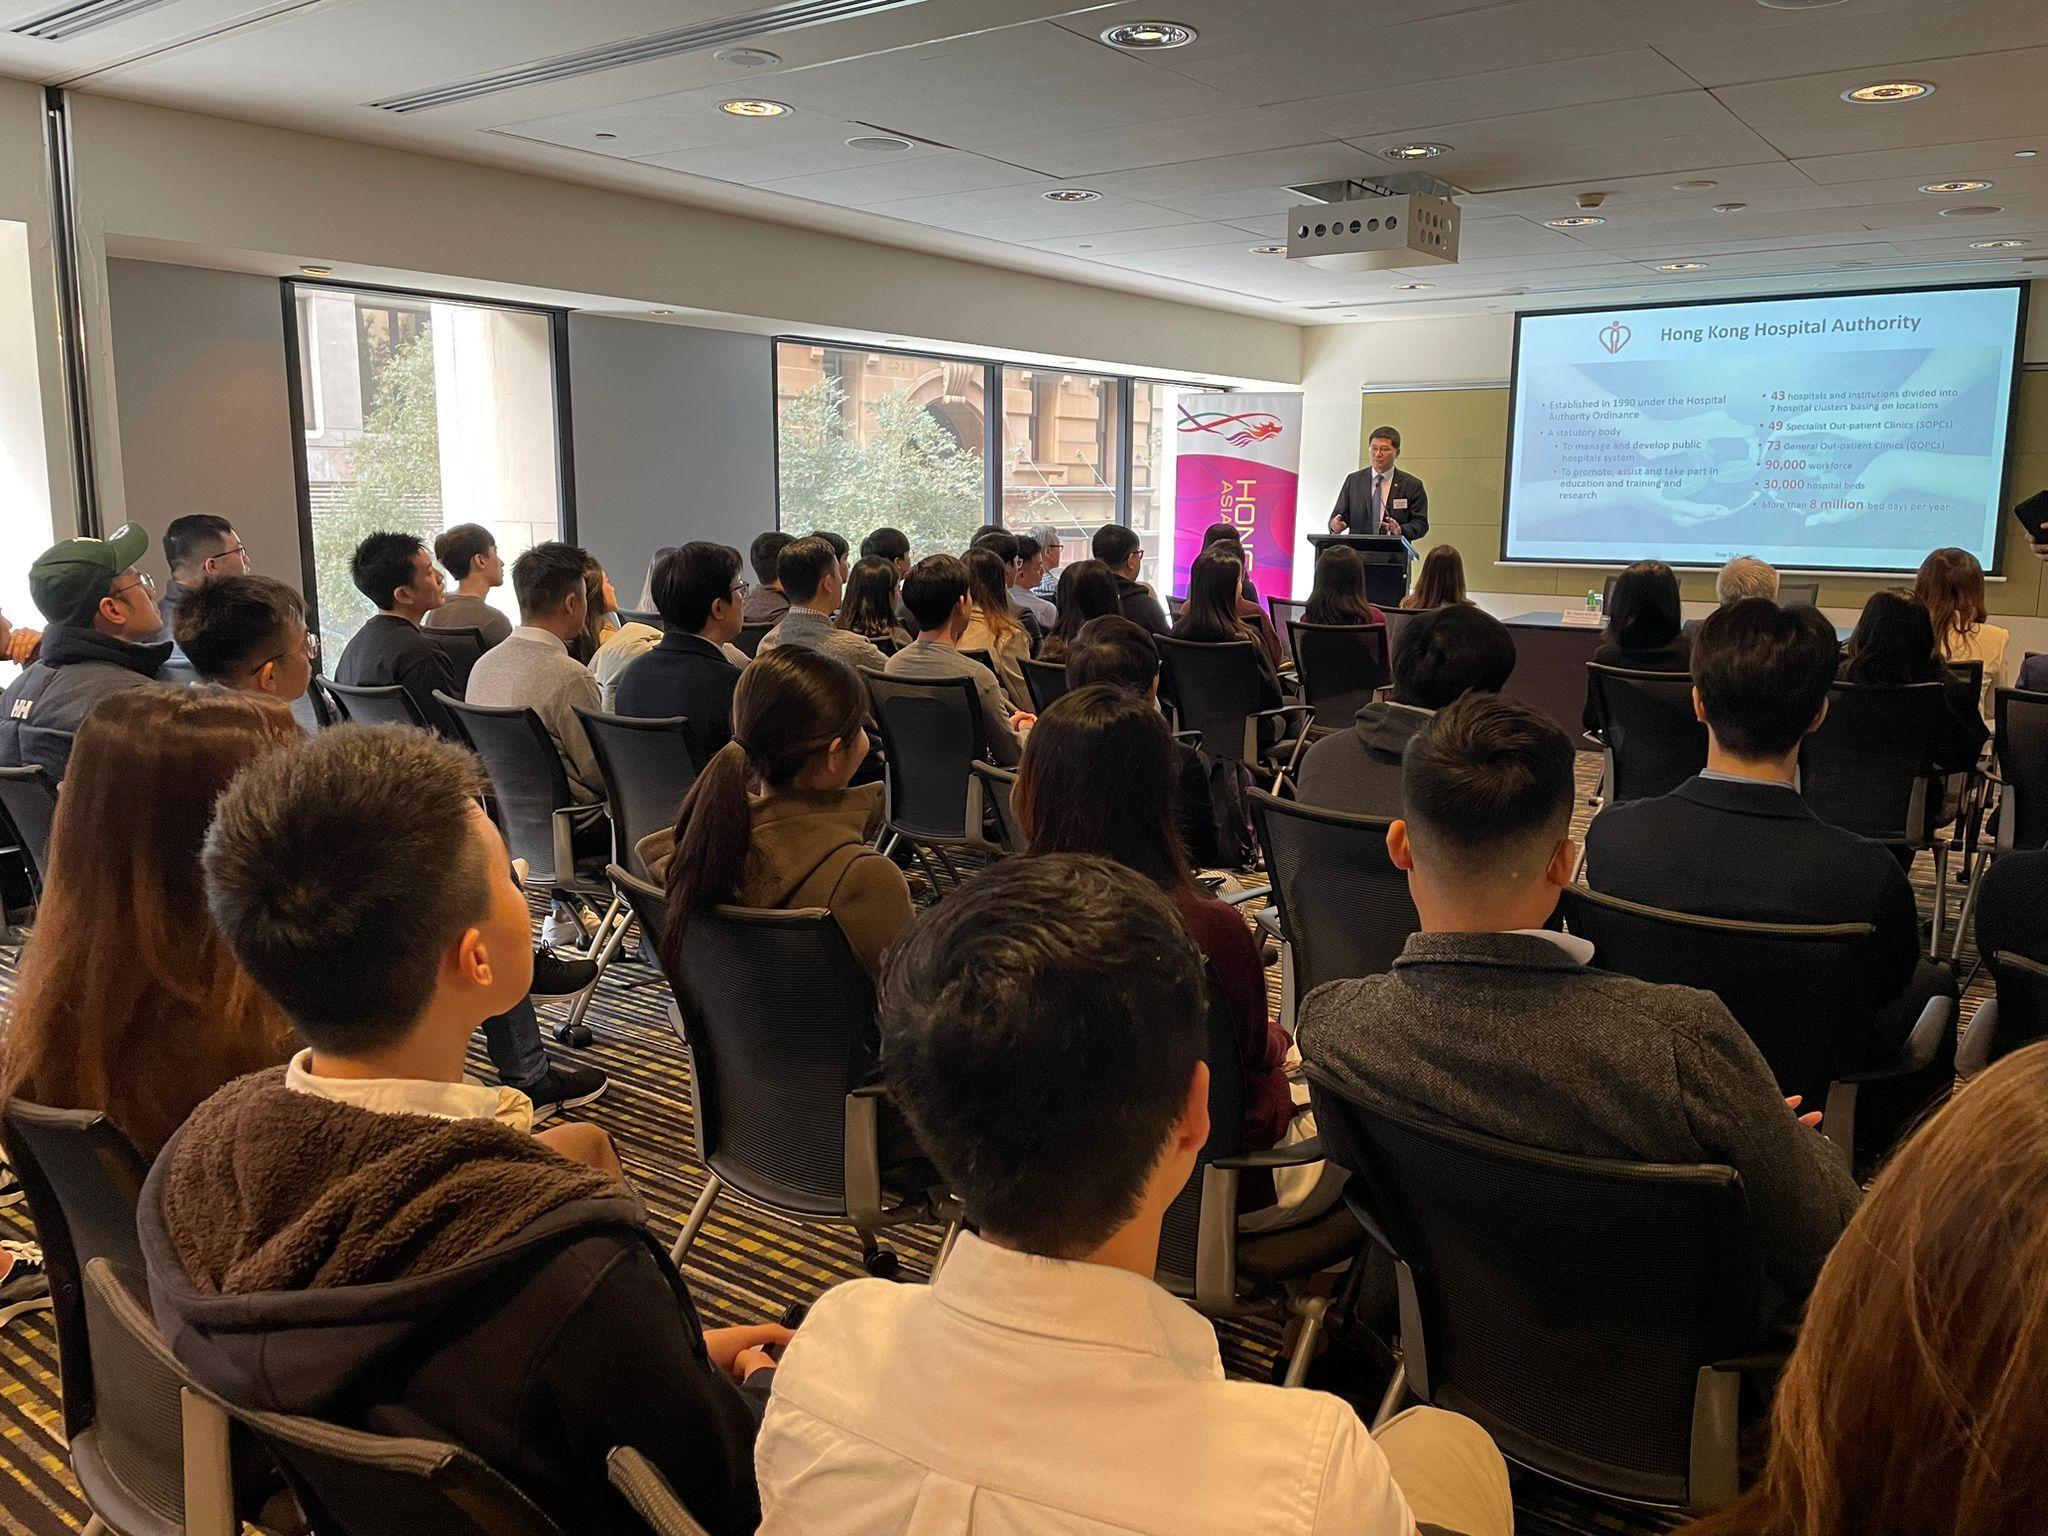 The Hospital Authority representatives participated in the recruitment event in Sydney of the Australia organised by the Hong Kong Special Administrative Region Government today (June 3), and promoted the latest pathway for working in Hong Kong, registration arrangements and specialist training arrangements to medical students and medical practitioners from Australia for practicing in Hong Kong.